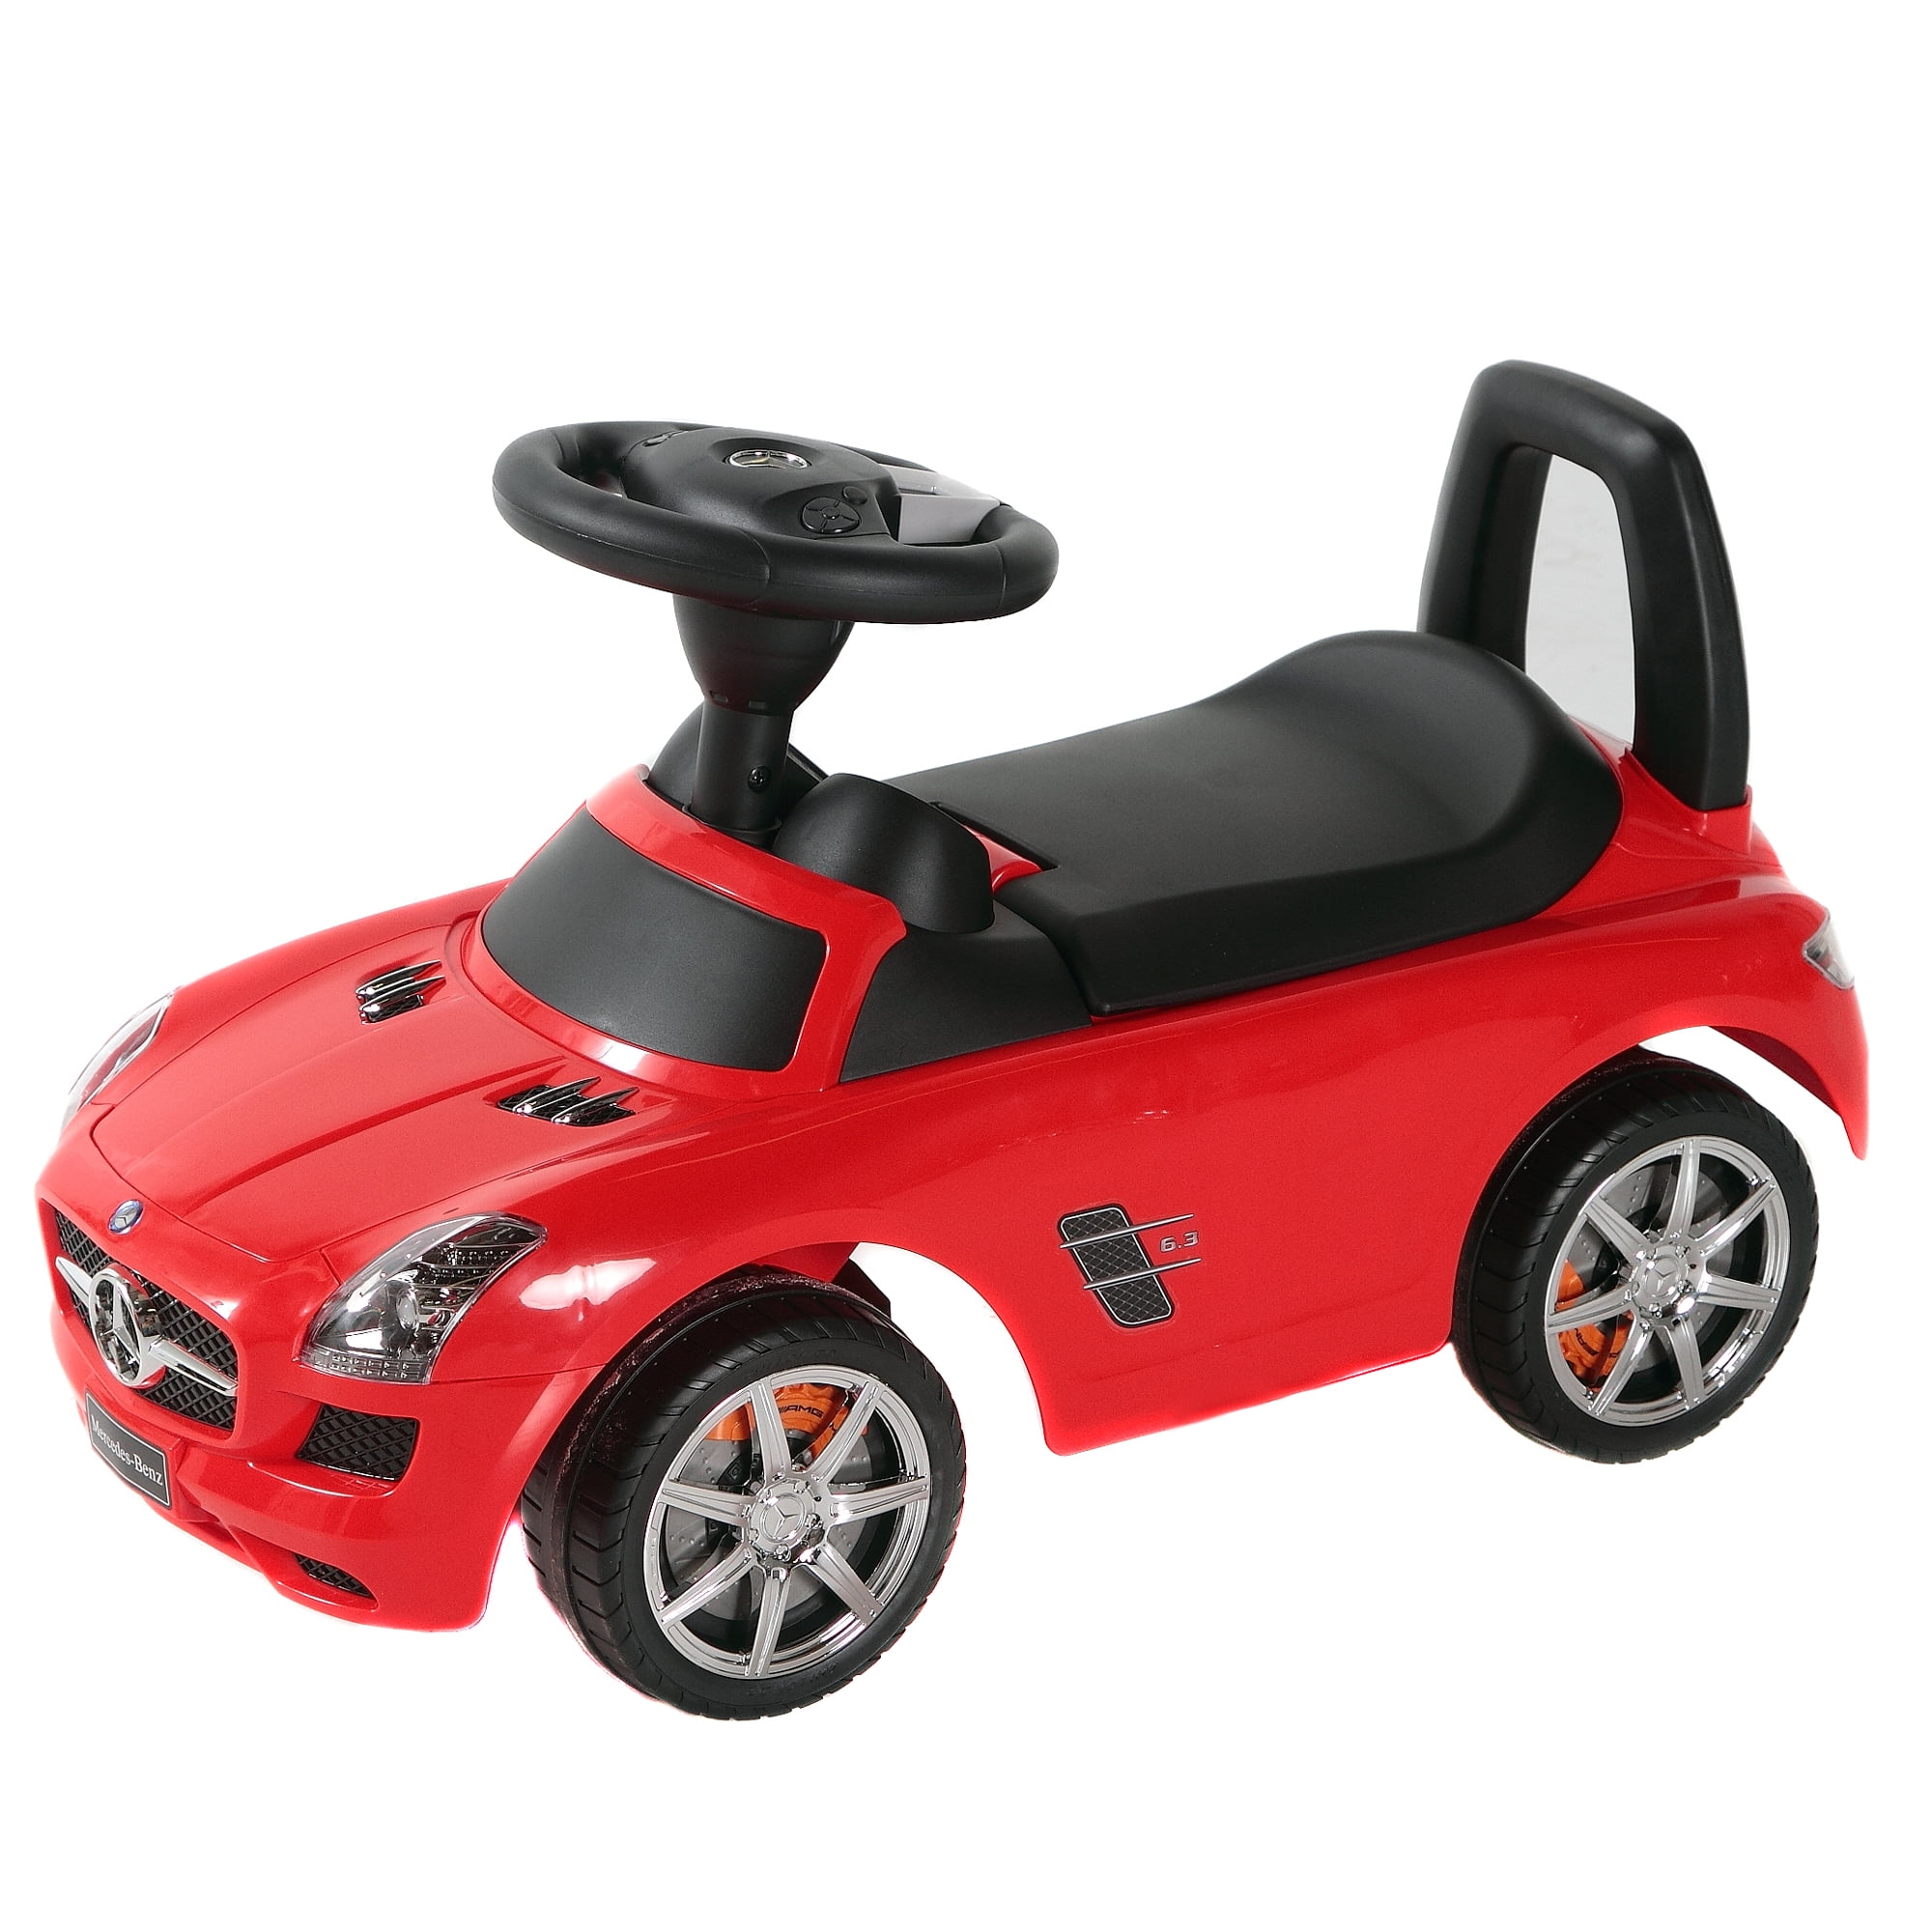 atmosfeer dialect dwaas Best Ride On Cars Baby Toddler Ride-On Mercedes Benz Push Car with Sounds -  Walmart.com